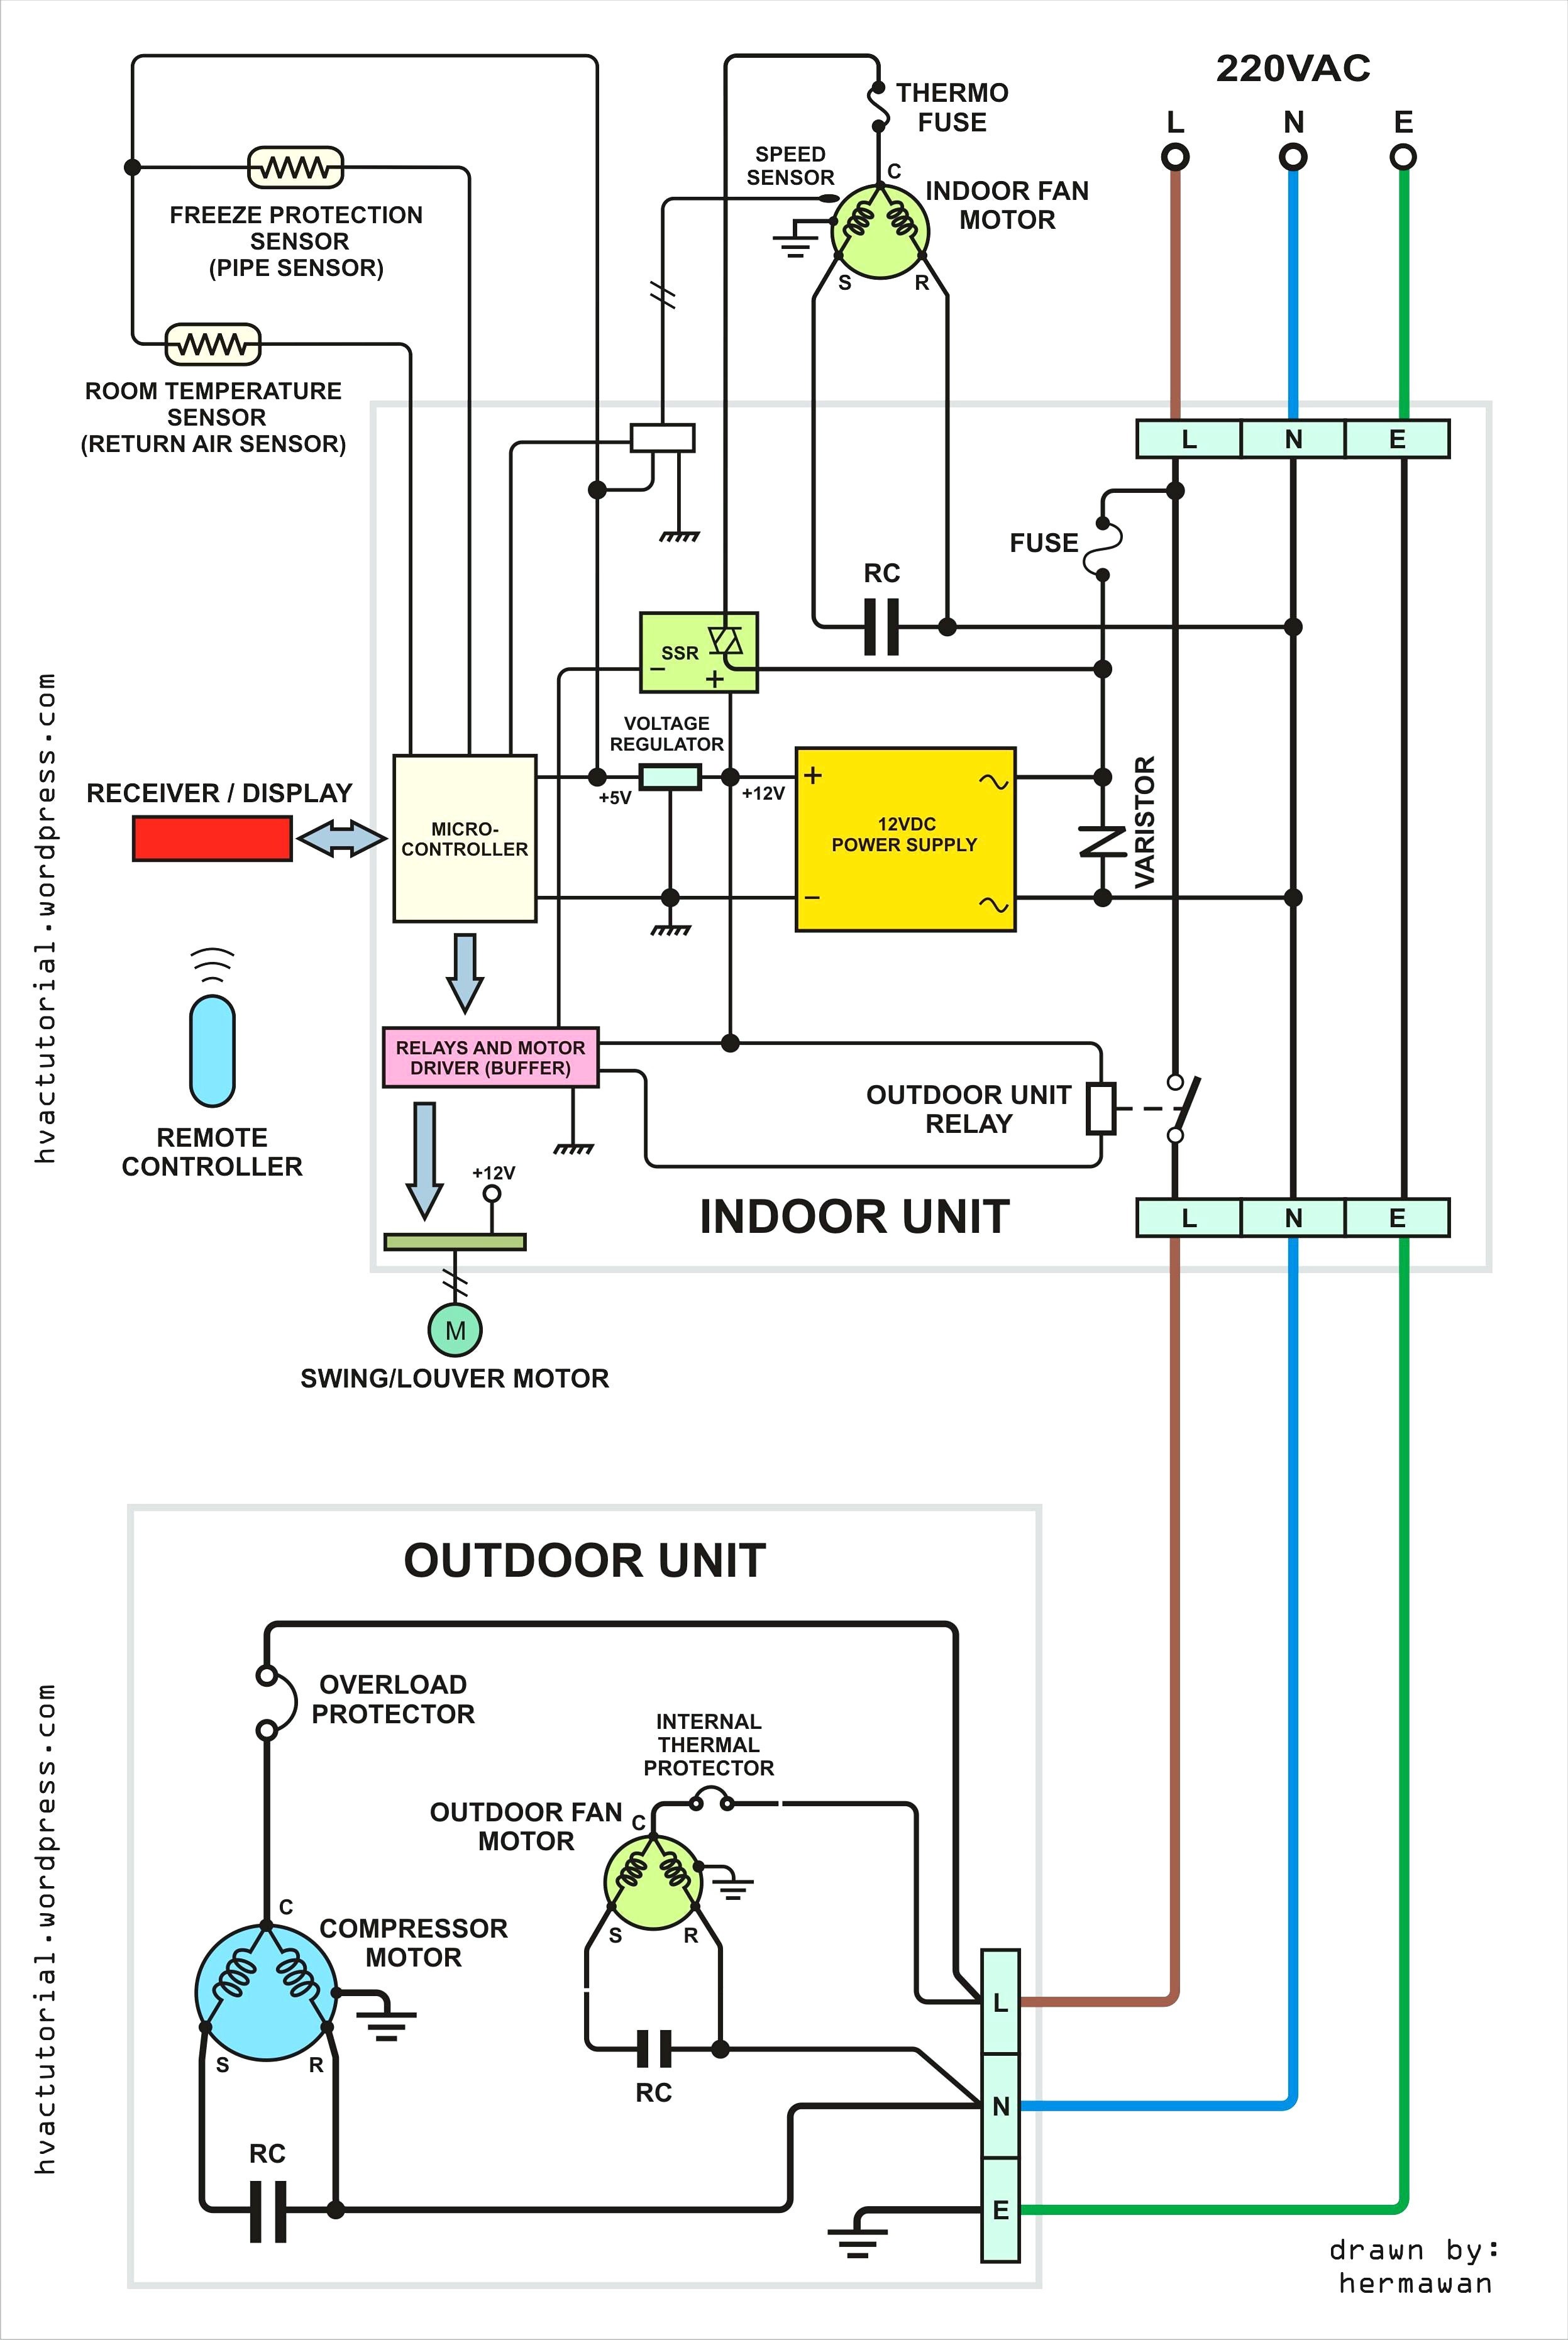 Wiring Diagram Phone Socket Best Wiring Diagram For Phone Line Valid Anyone Have A Gear Vendors